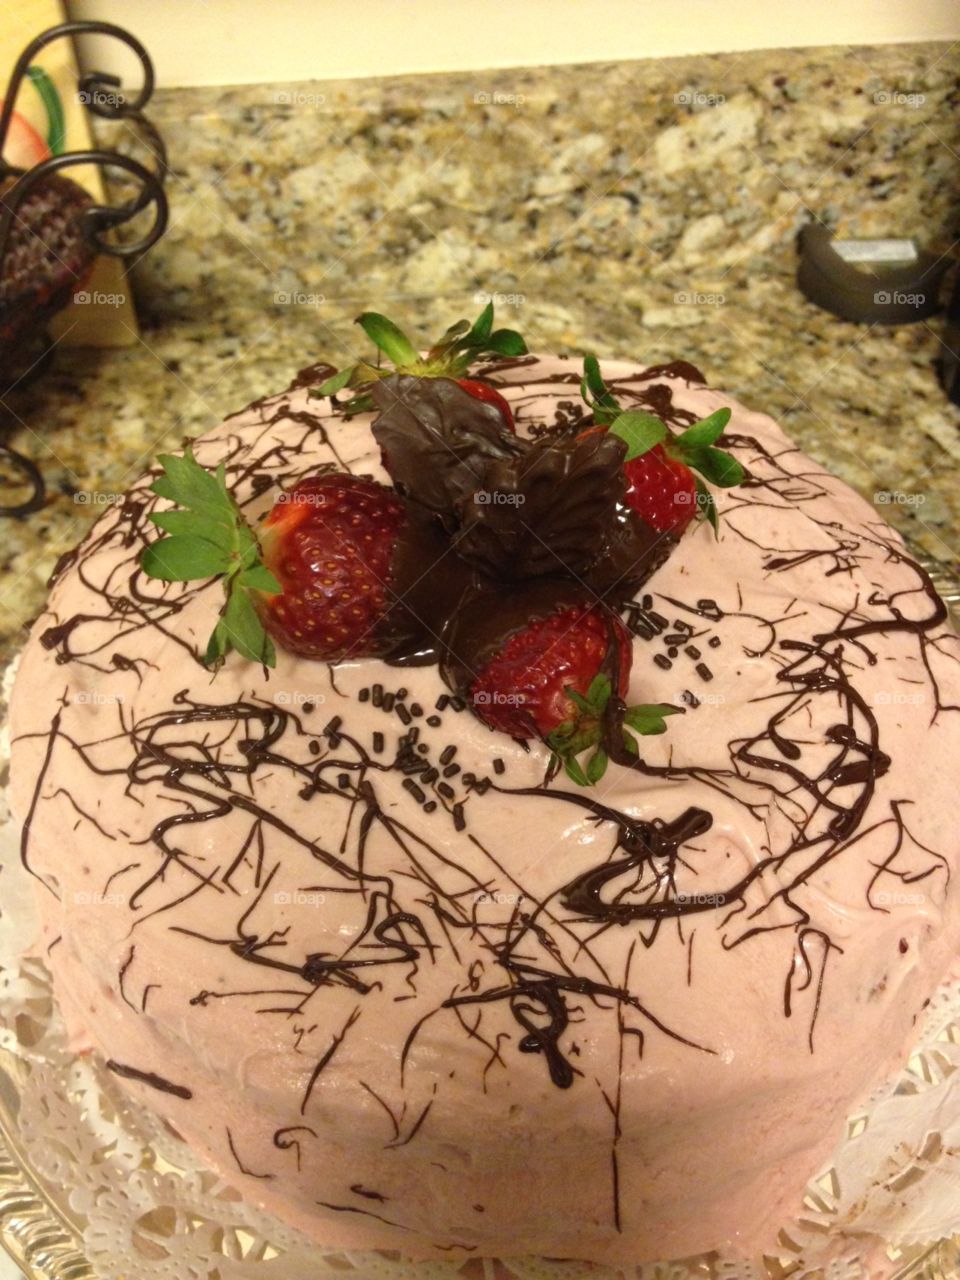 For the Strawberry Lovers of My Heart is my Valentine Strawberry Lovers Cake.
Baked fresh with sweet strawberries and drizzled  rich chocolate on sweethearts day.
From Katrina's Kitchen on Sparkleberry Lane in the great state of Georgia.